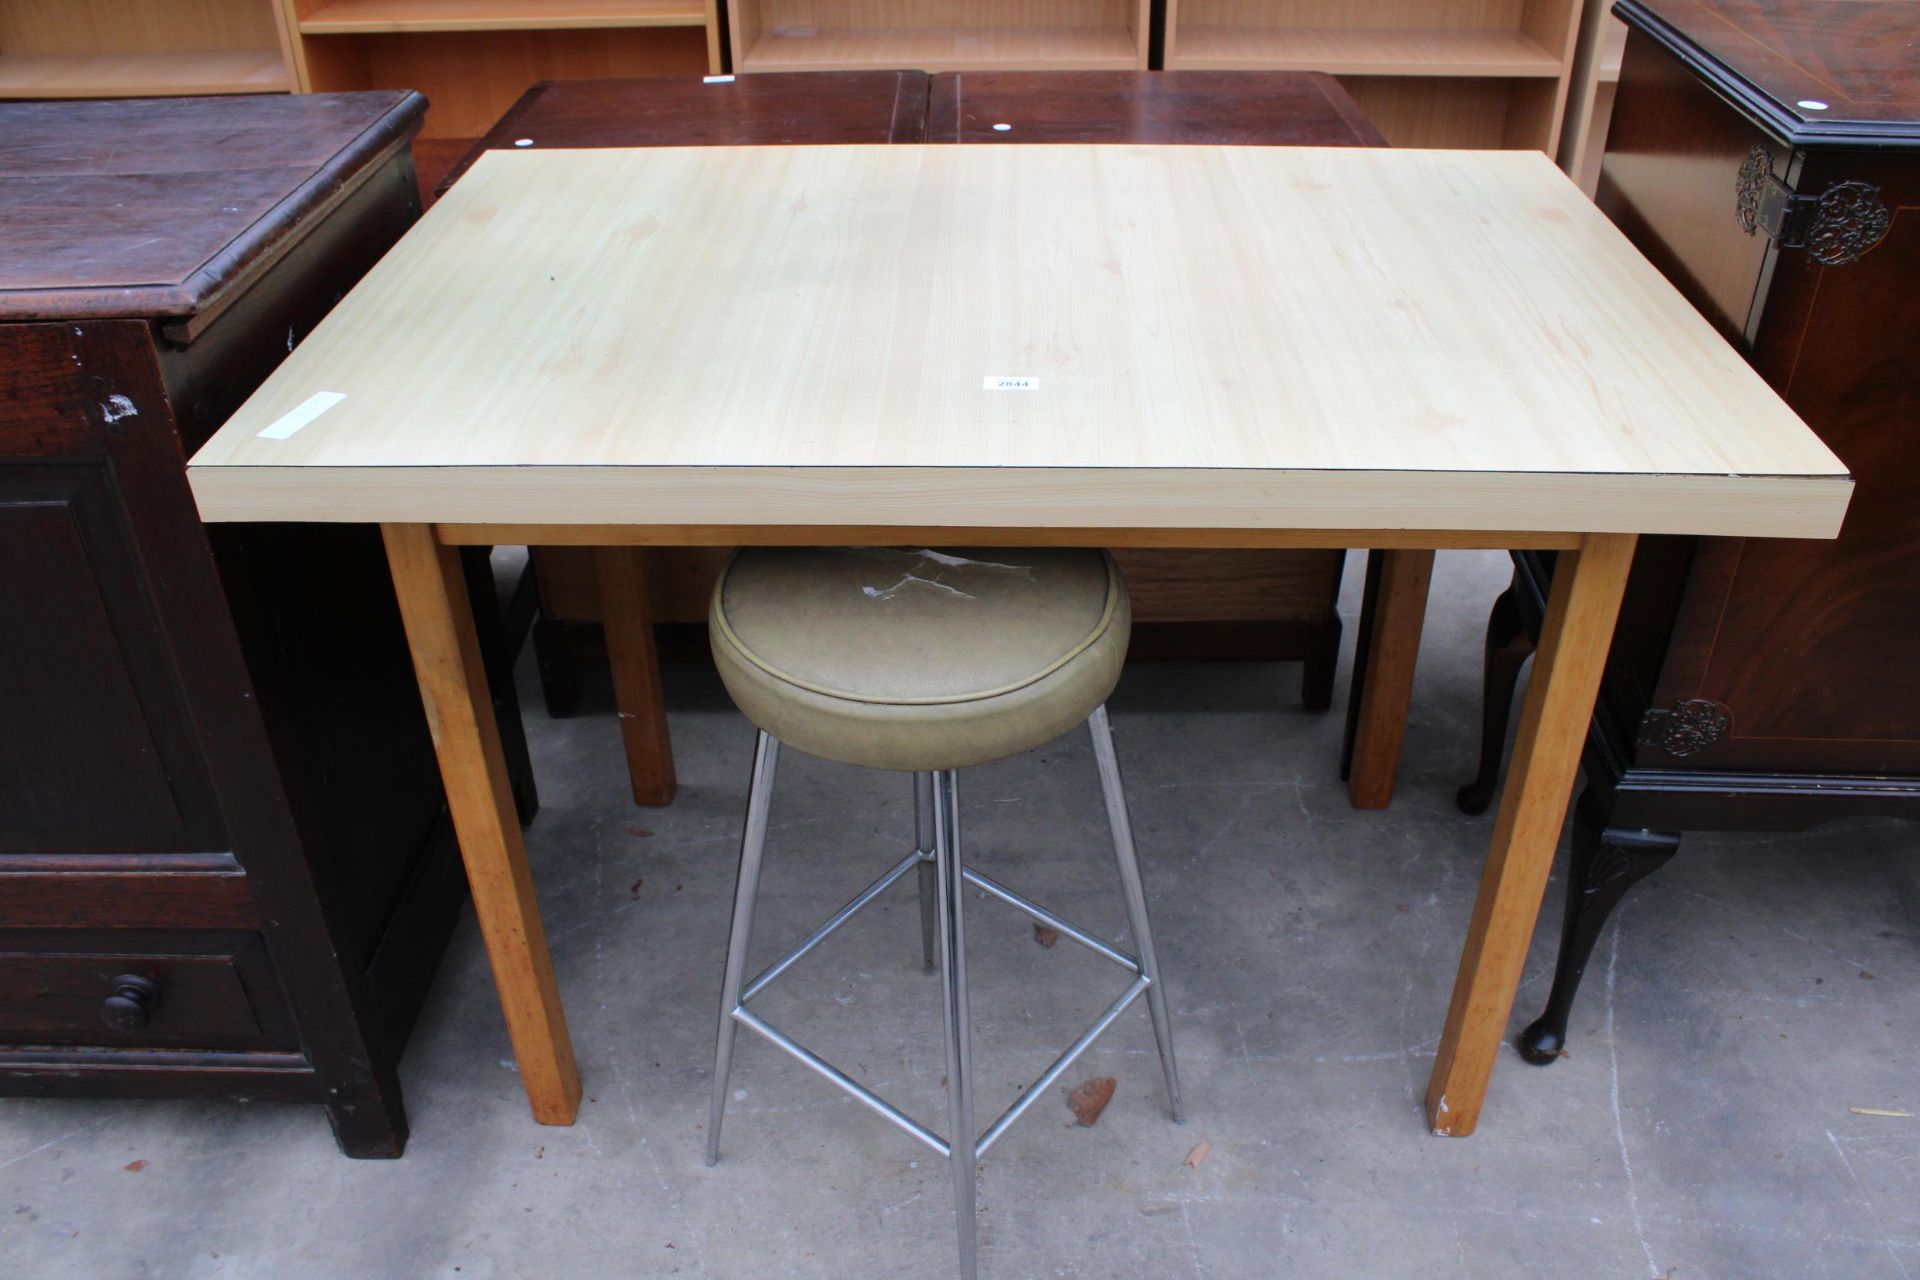 A FORMICA TOP KITCHEN TABLE 43" X 28" AND A KITCHEN STOOL